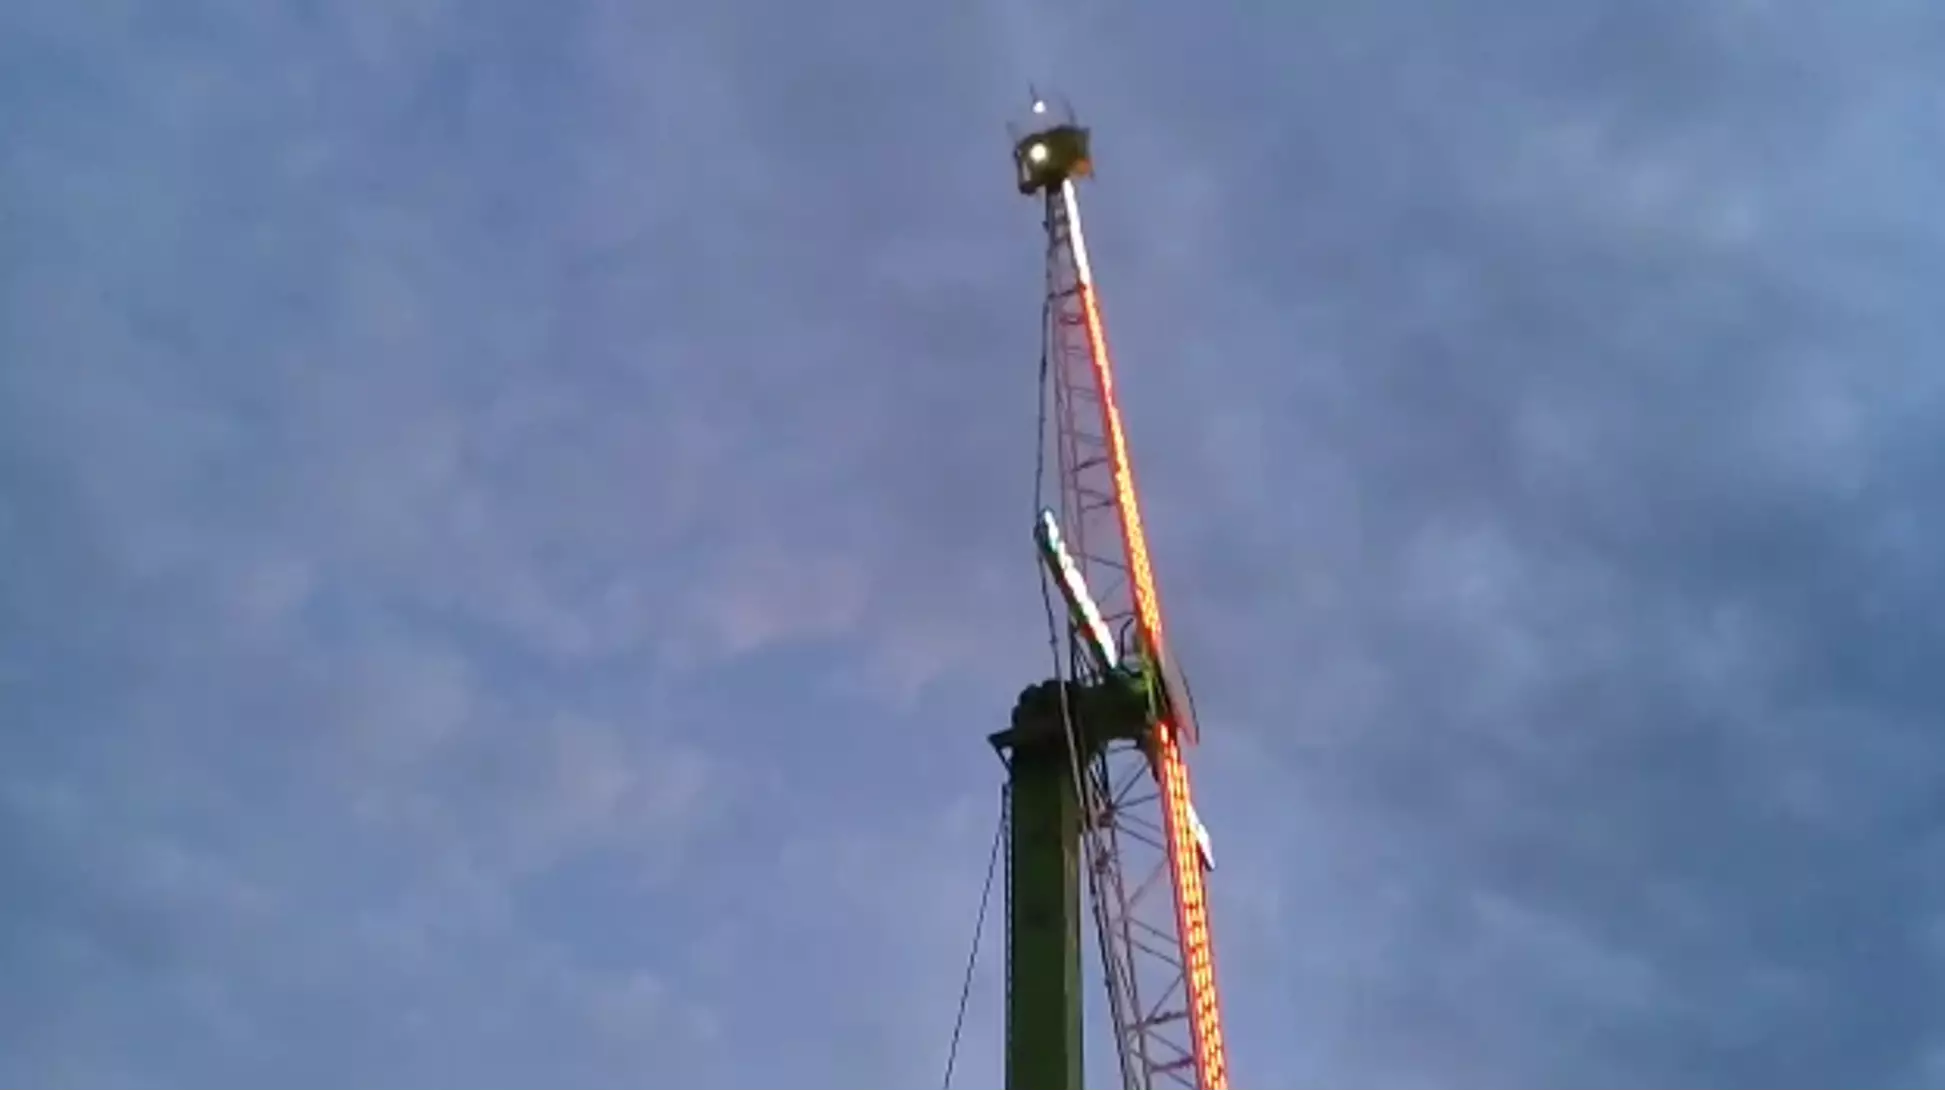 Teenager Survives 130ft Drop From Fairground Ride